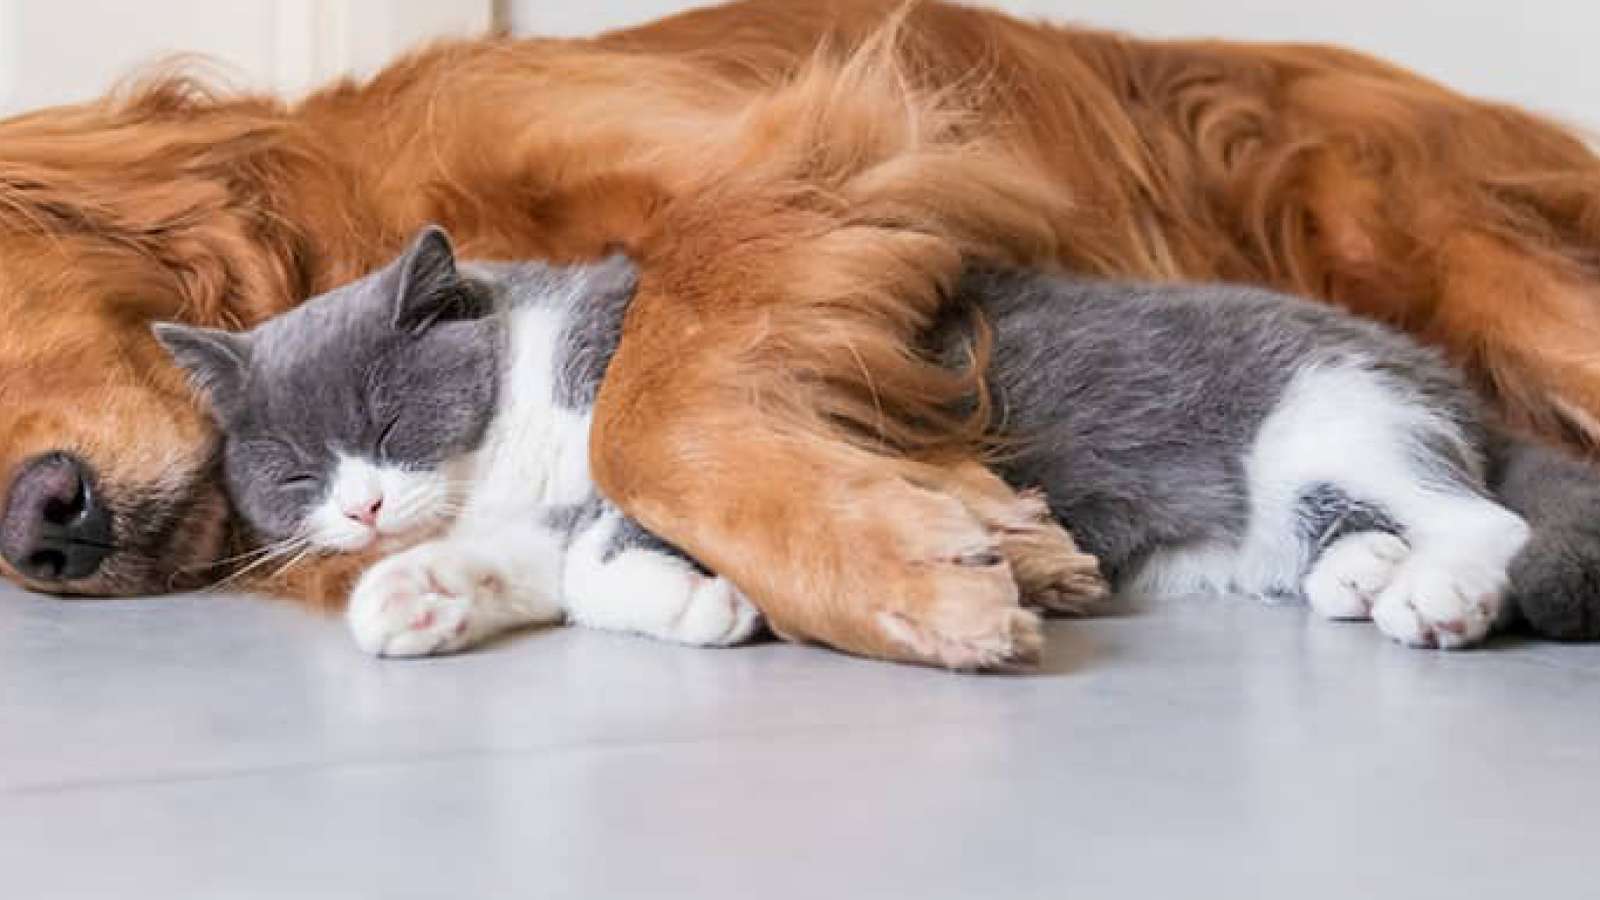 Dog and cat hugging